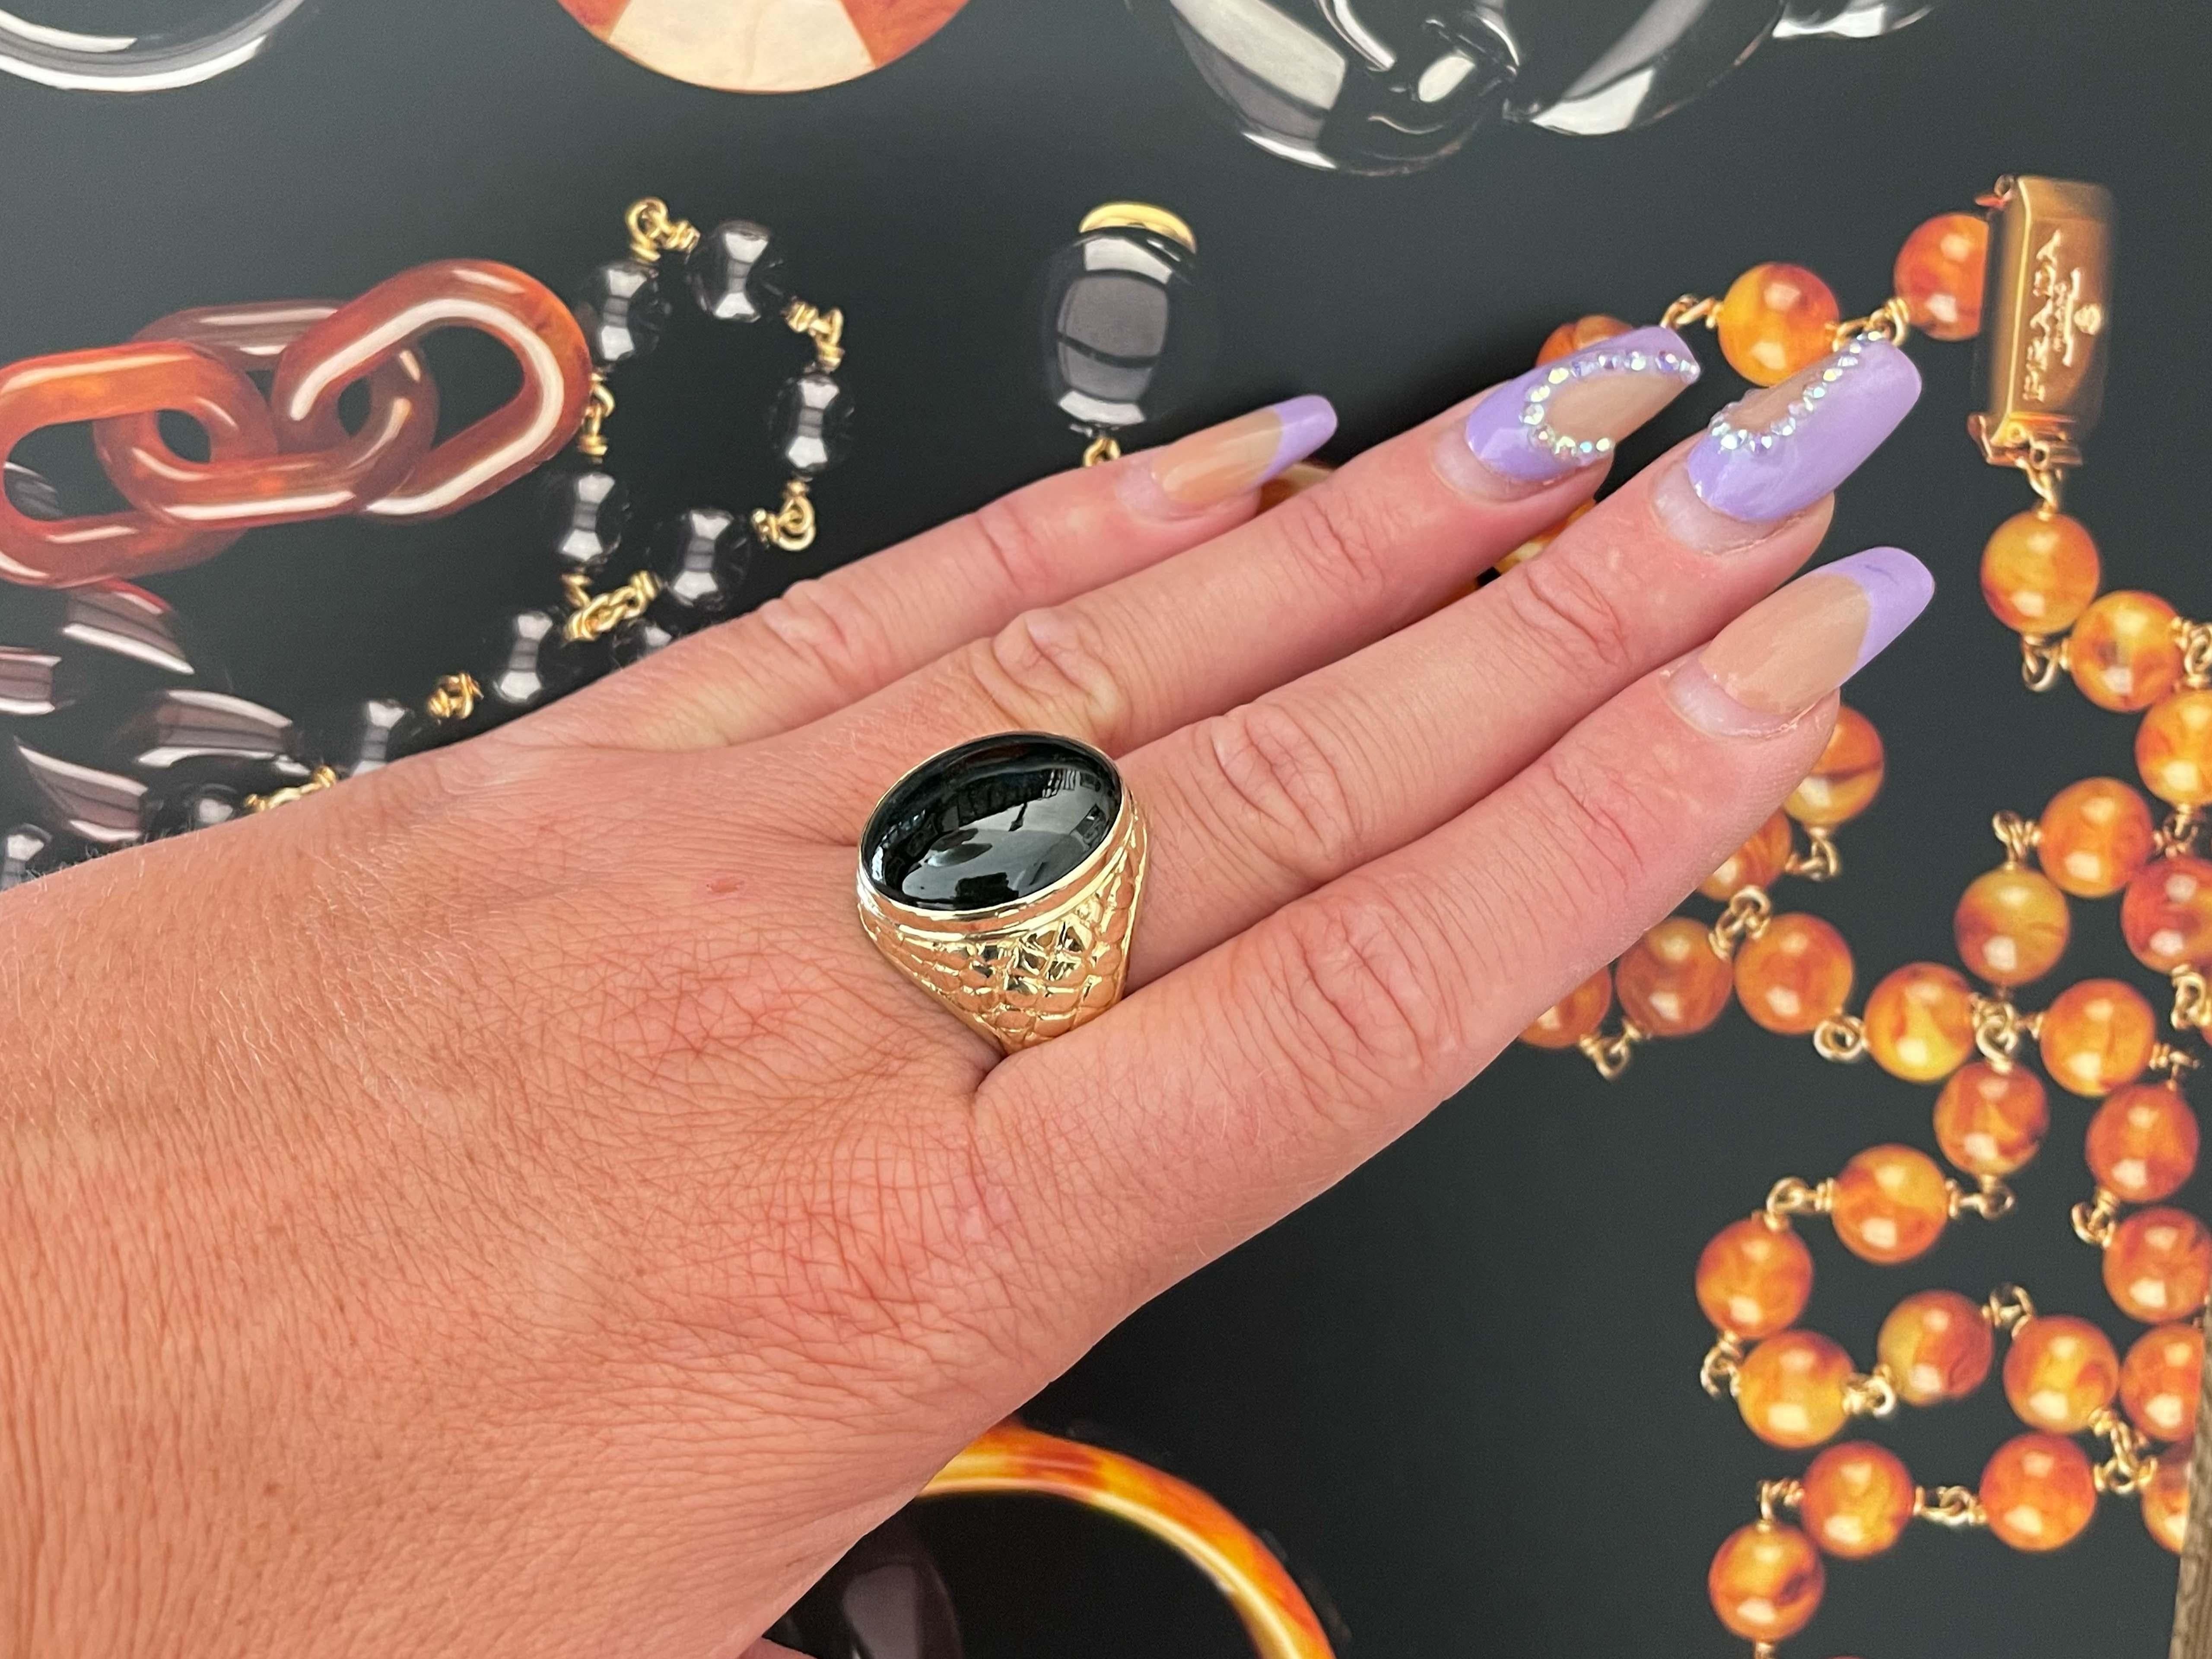 Magnificent vintage oval cabochon black jade ring in 14k yellow gold. The stunning black Jade is bezel set and measures approximately 20.45 mm x 15.52 mm x 7.38 mm. The ring has a tapered shank with a high polish finish and a reptile design on both